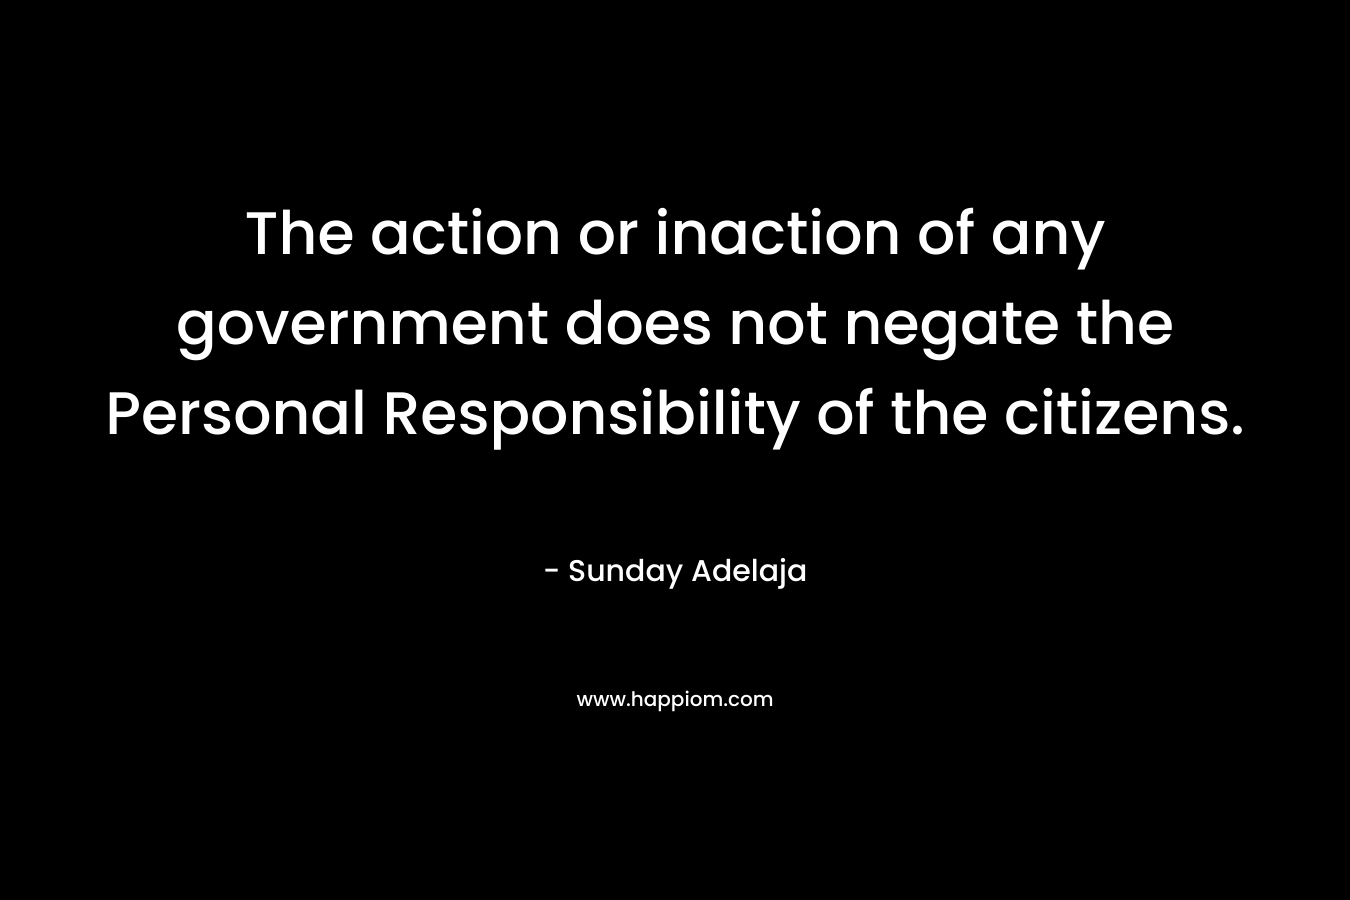 The action or inaction of any government does not negate the Personal Responsibility of the citizens.